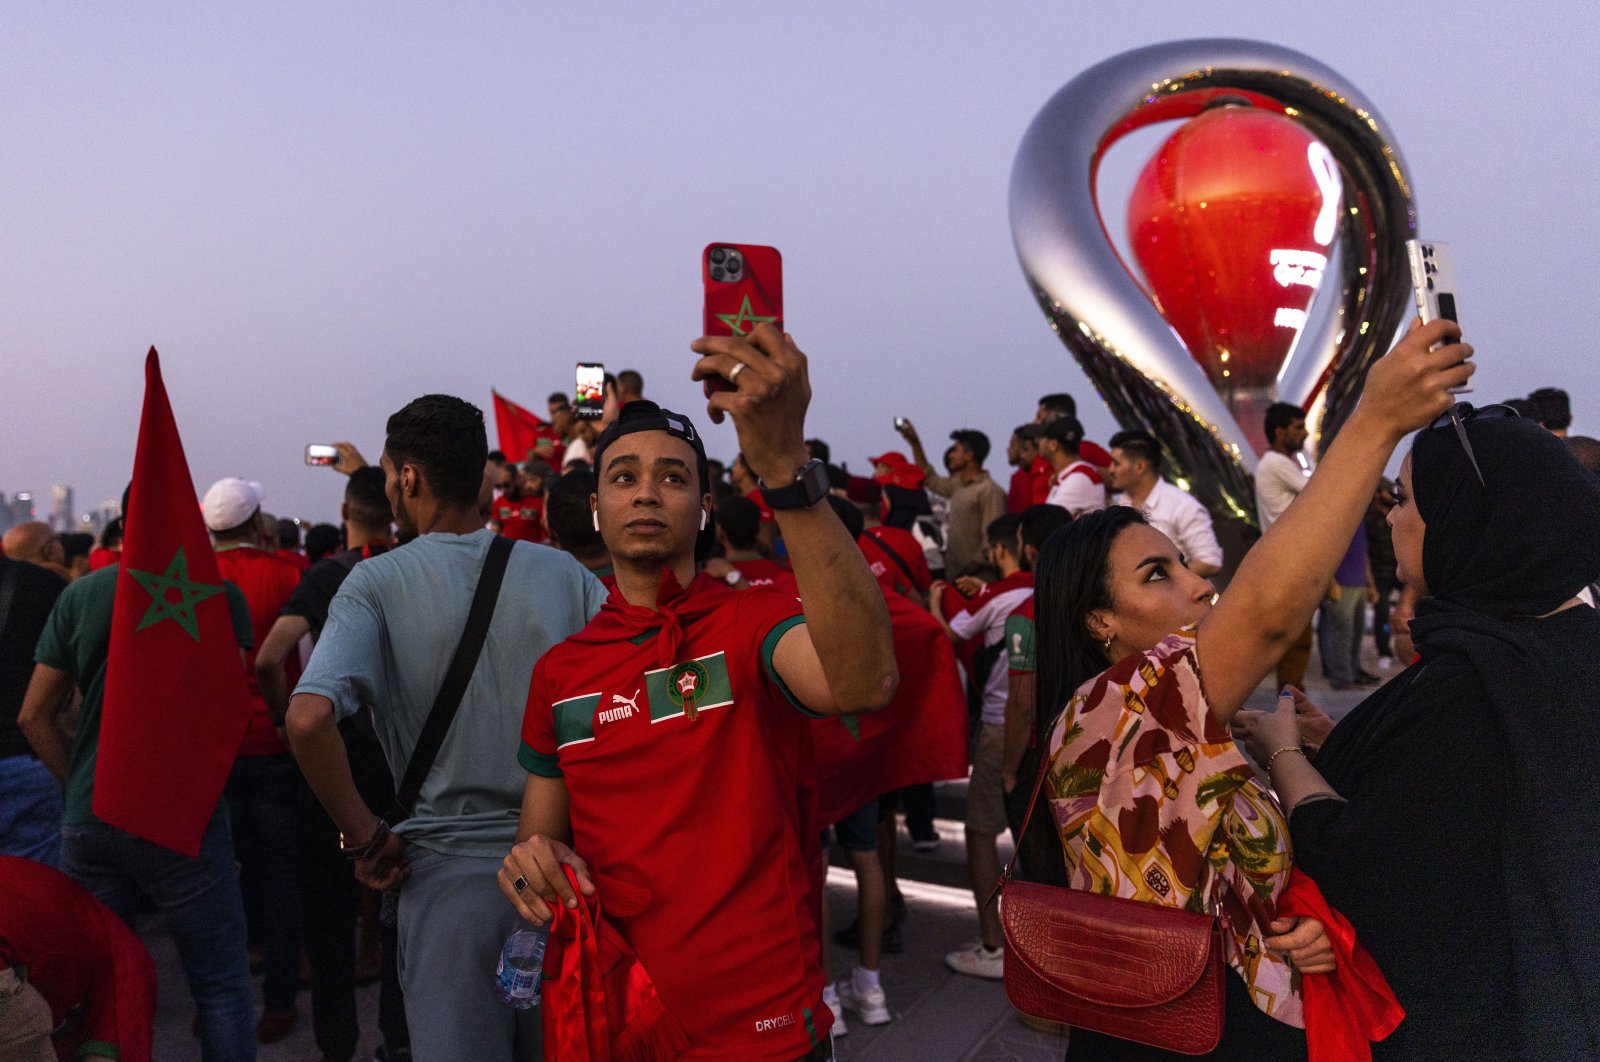 Fans of Morocco take photos next to the Hublot World Cup Official countdown watch at Doha Corniche ahead of the FIFA World Cup Qatar 2022. Doha, Qatar, Nov. 14, 2022. (Getty Images Photo)